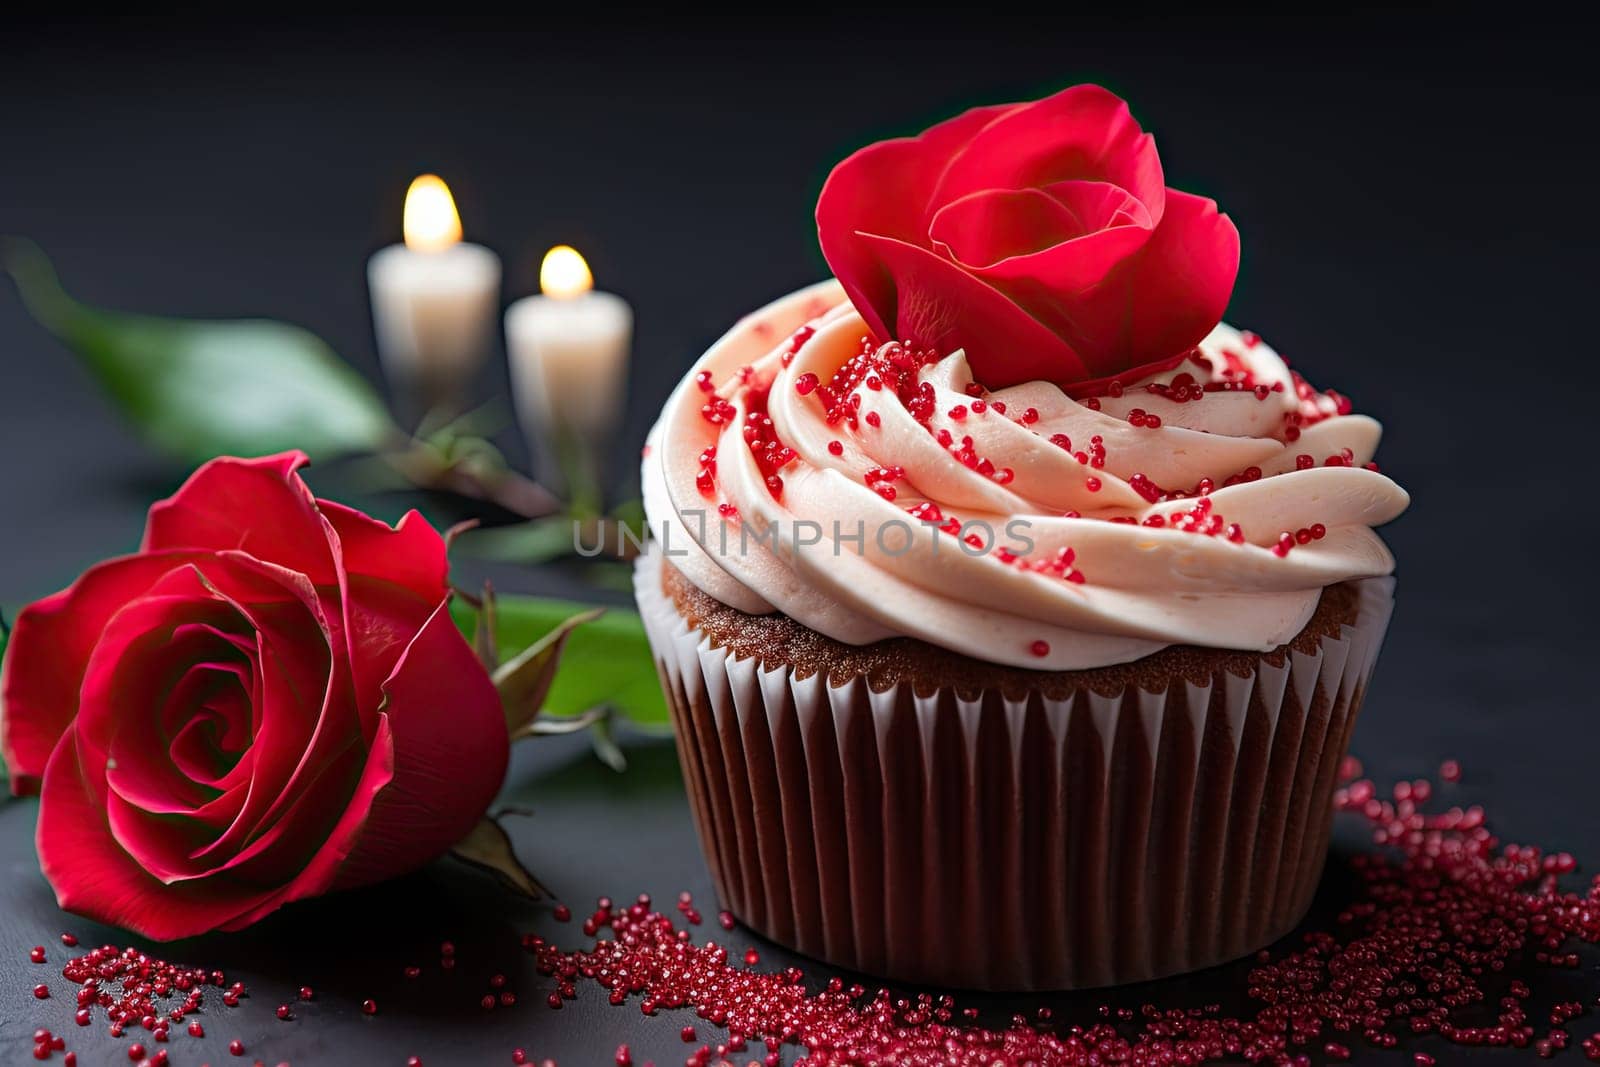 A Sweet Delight: Cupcake with Fluffy White Frosting and a Vibrant Red Rose Created With Generative AI Technology